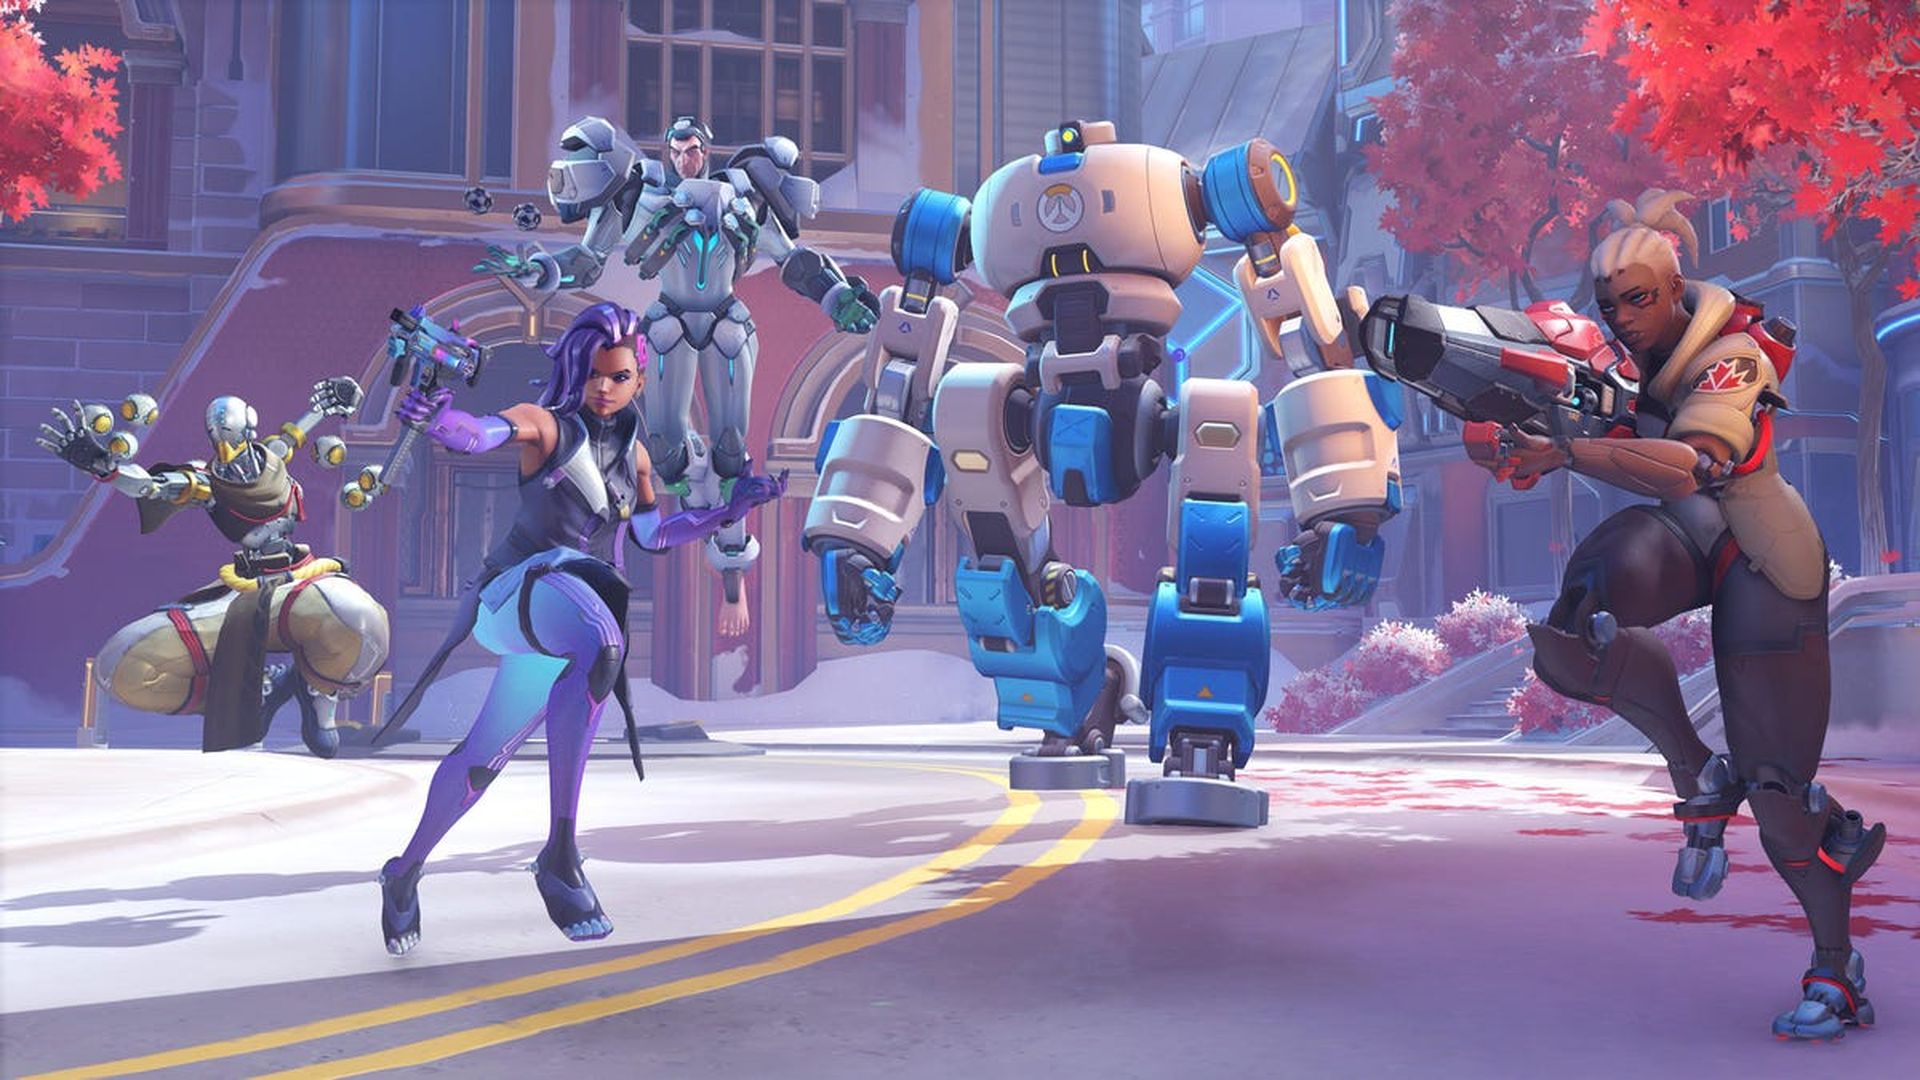 Now that Overwatch 2 PvP is released as free-to-play, here is our guide on Overwatch 2 ranking system and how to unlock competitive in Overwatch 2.